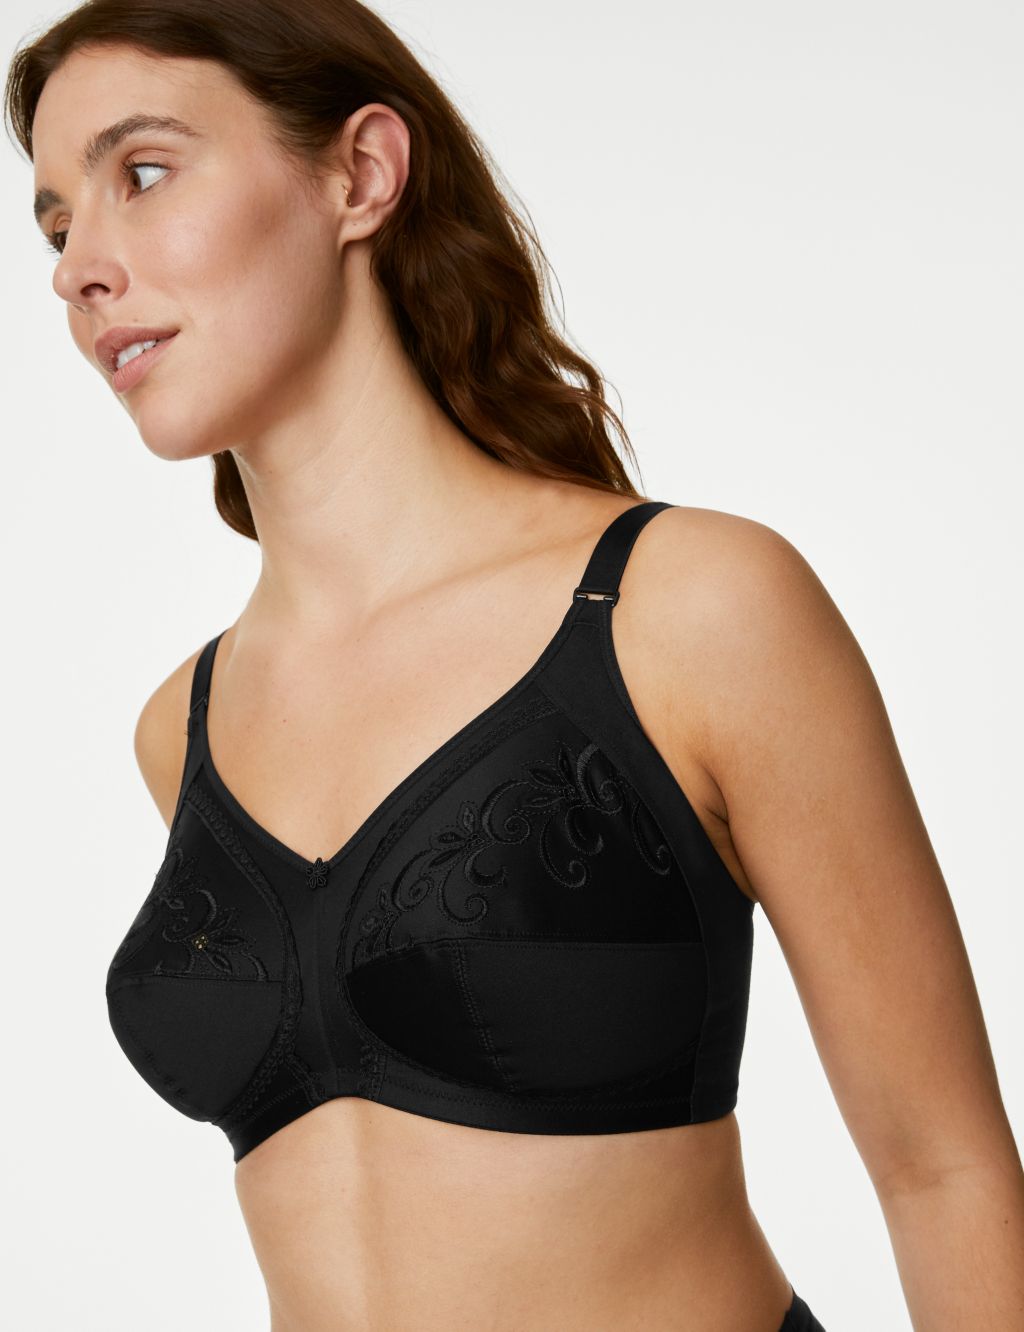 Total Support Embroidered Full Cup Bra B-H image 3